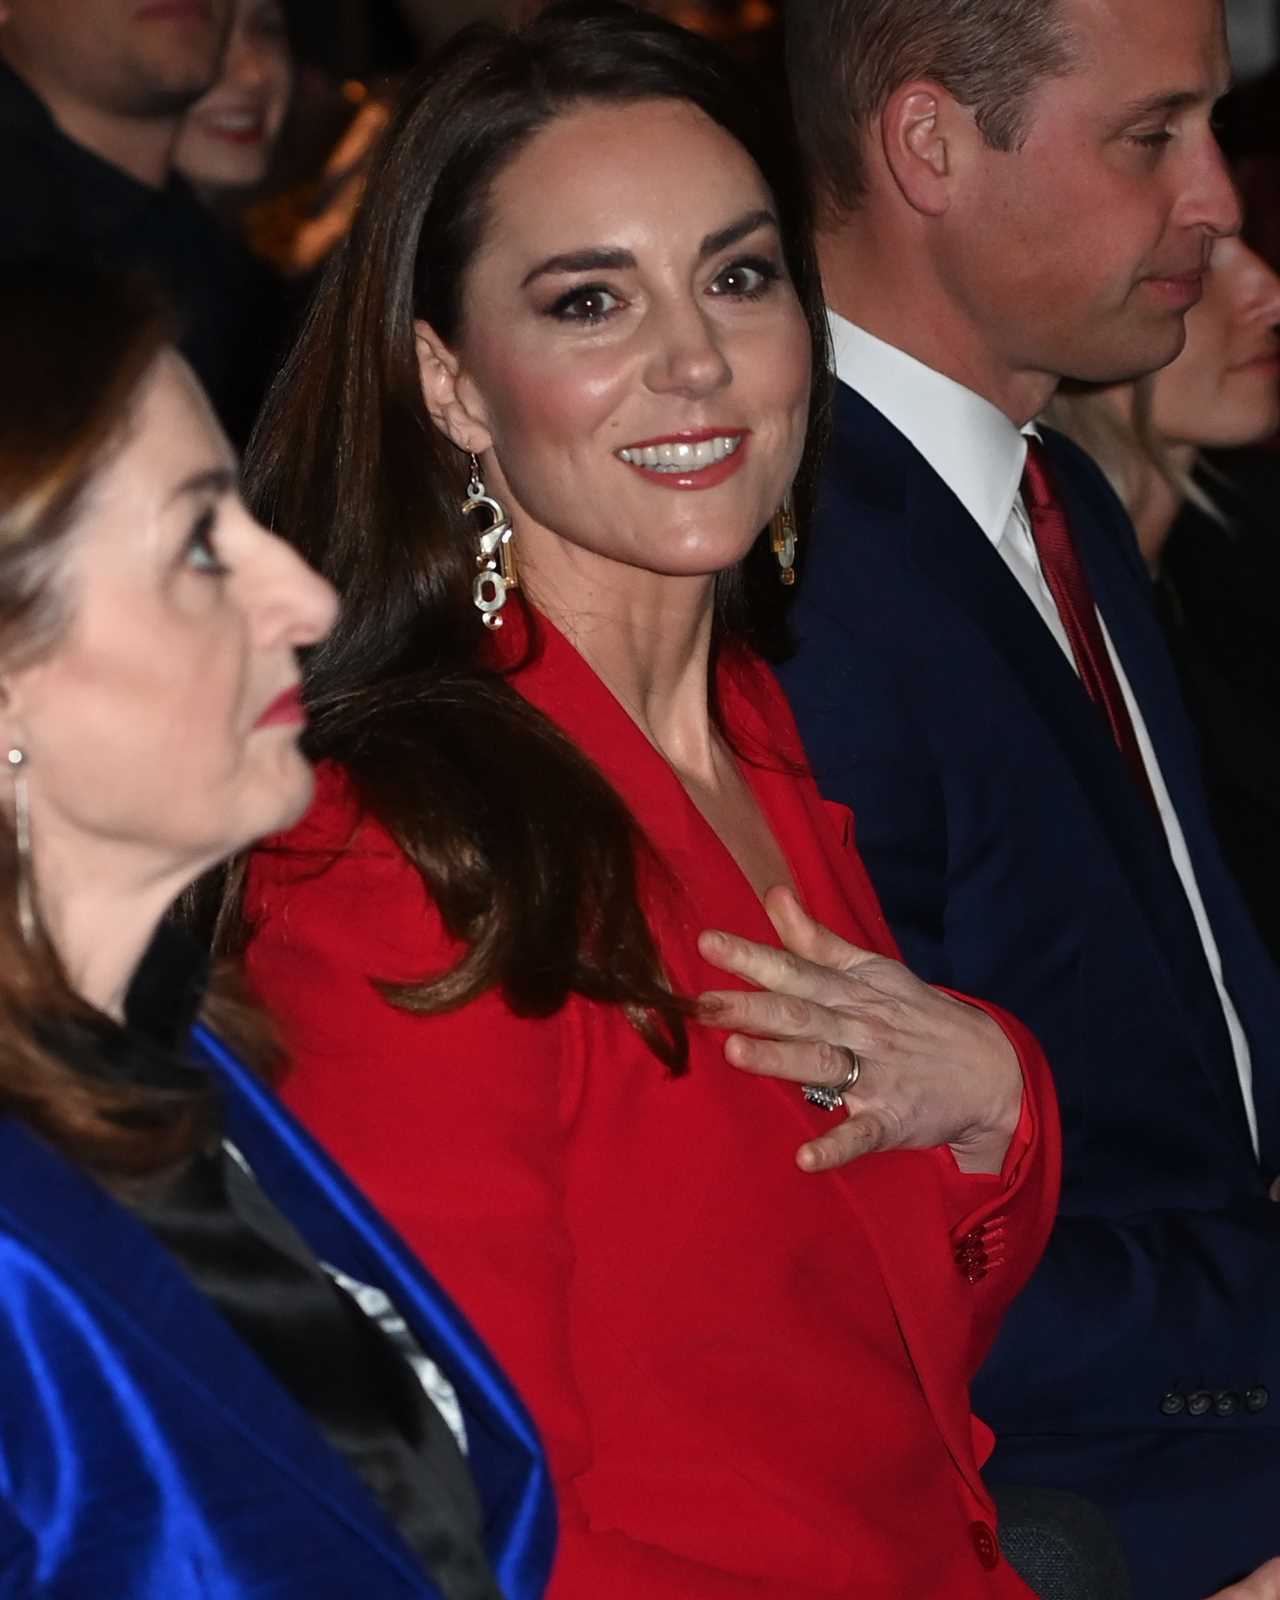 Kate Middleton dazzles in a red suit as she joins Prince William at star-studded gala